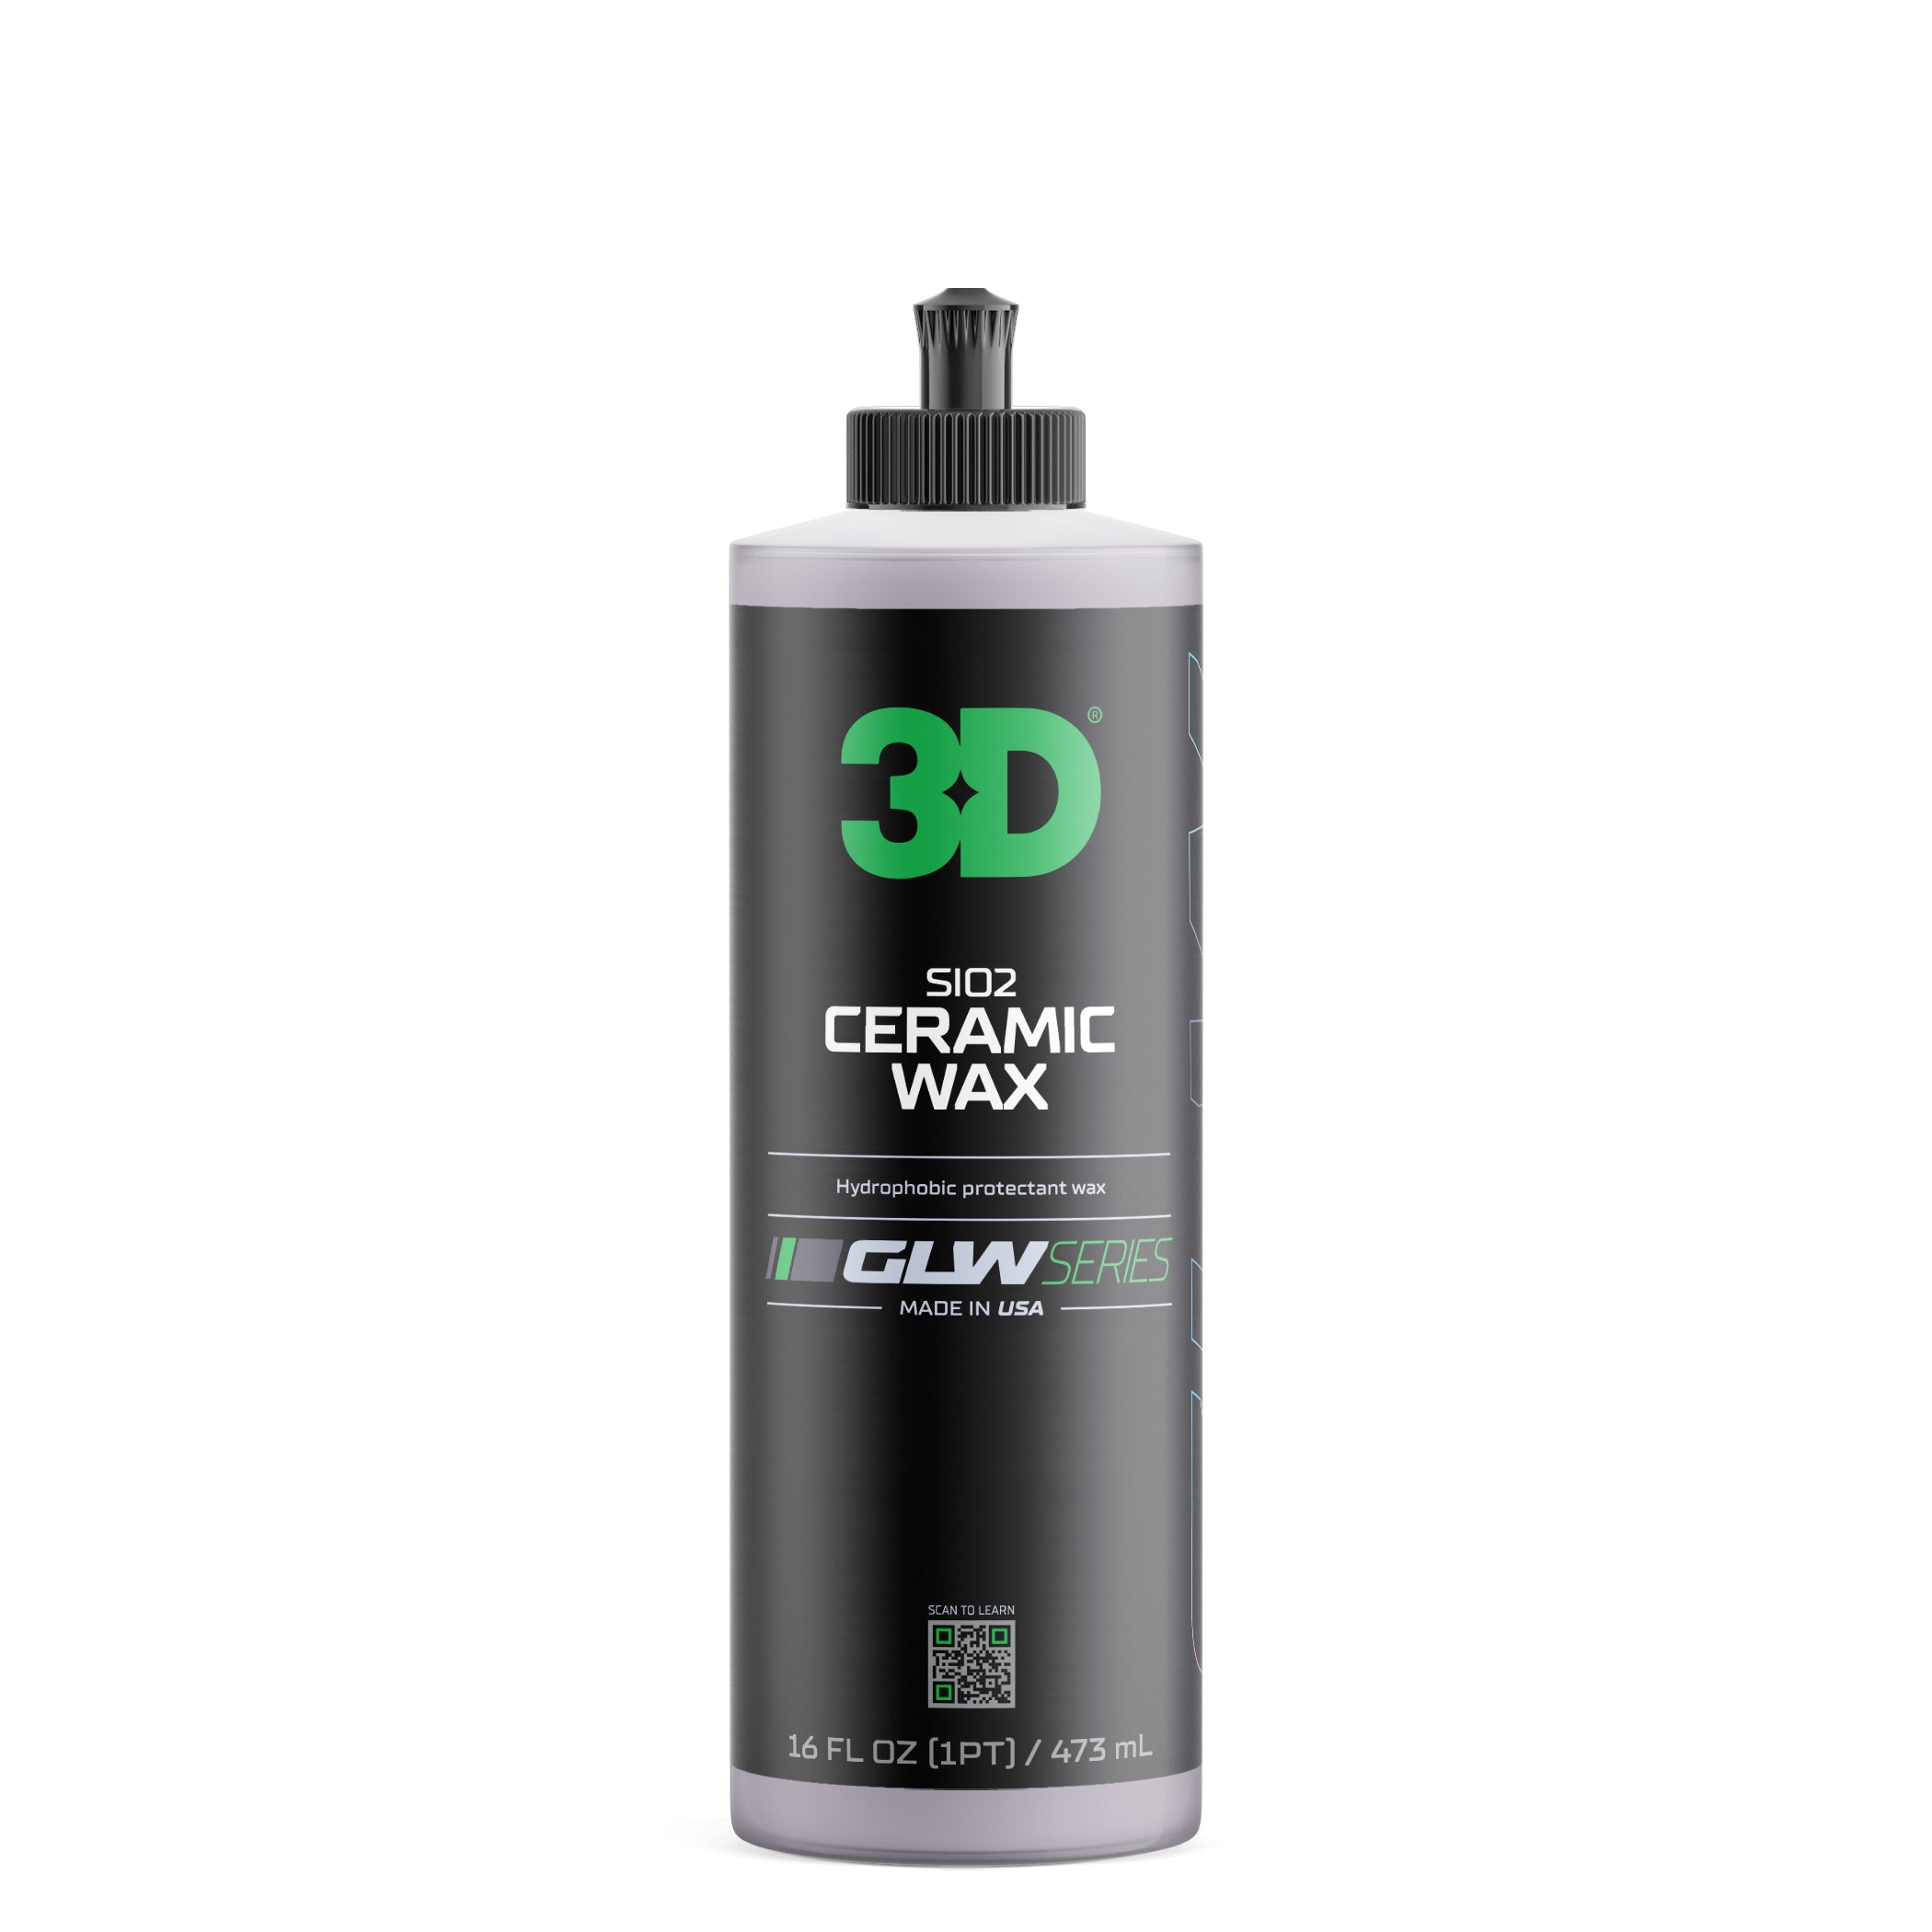 3D Glass Cleaner